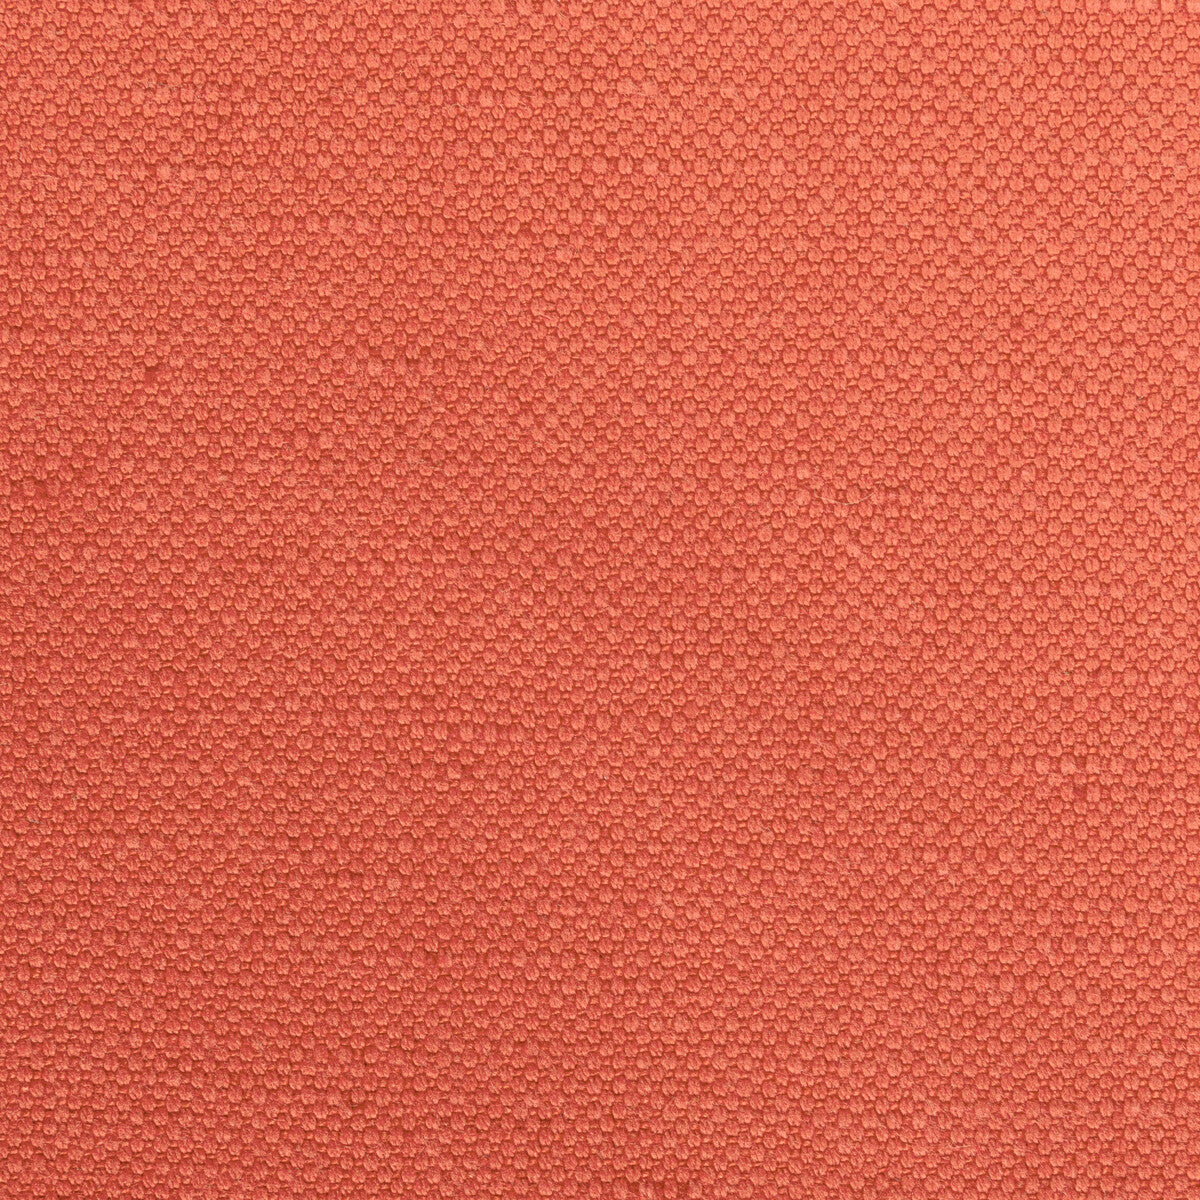 Carson fabric in petal color - pattern 36282.712.0 - by Kravet Basics